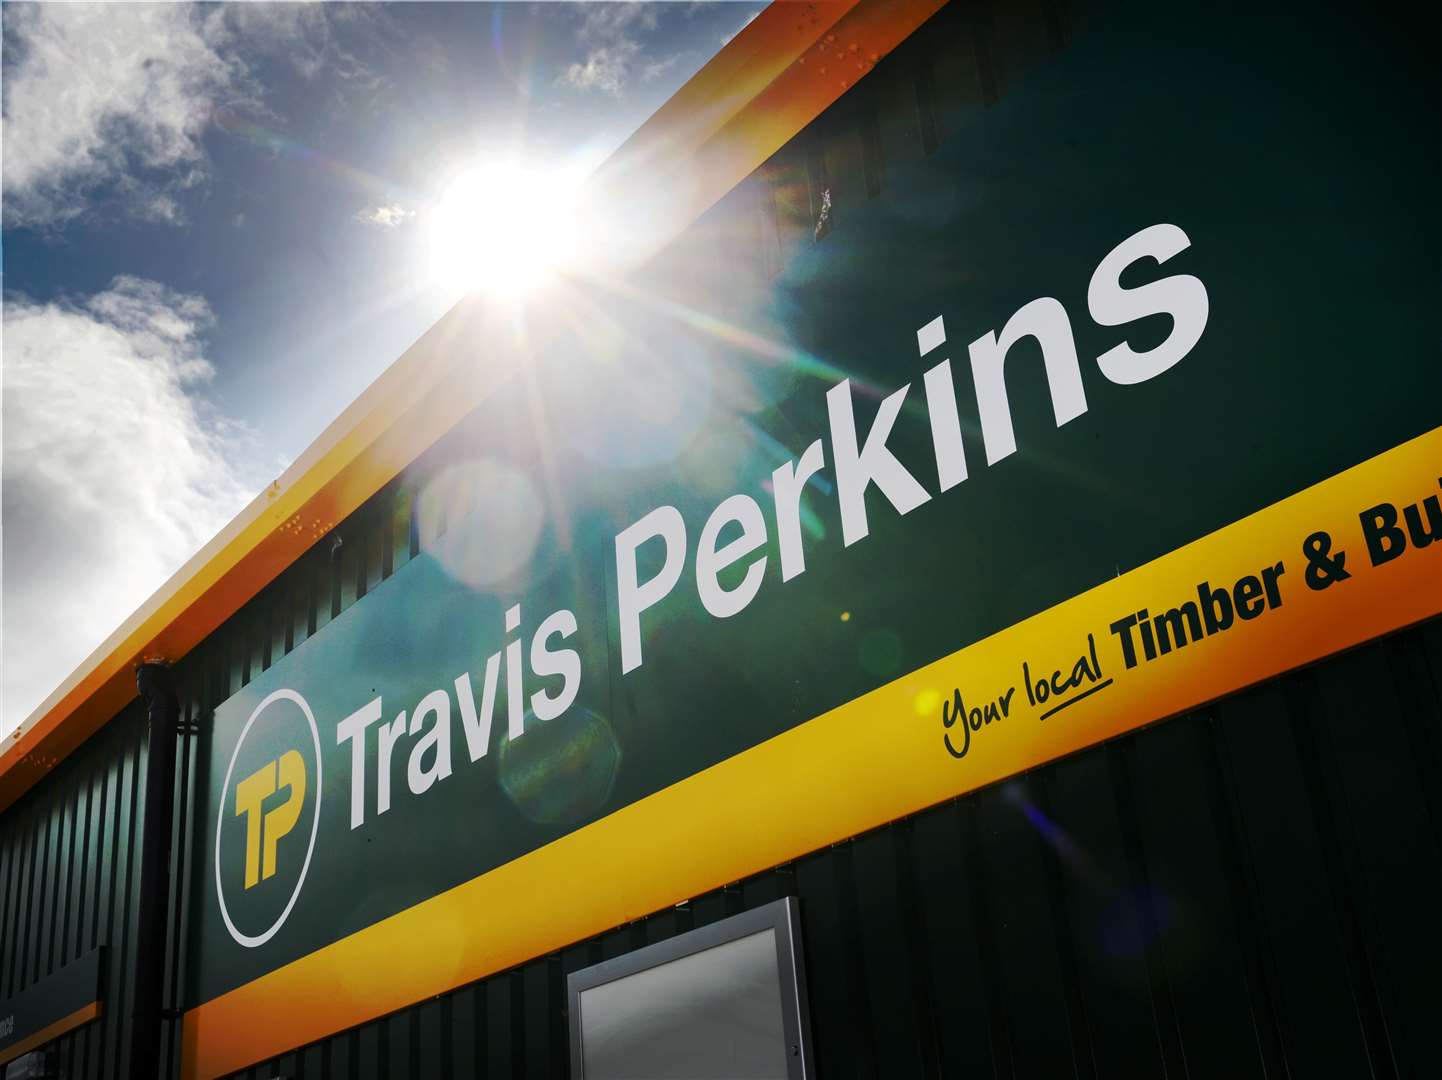 Travis Perkins says it is seeking to continue 'with a cost base that better reflects the environment we are operating in'.